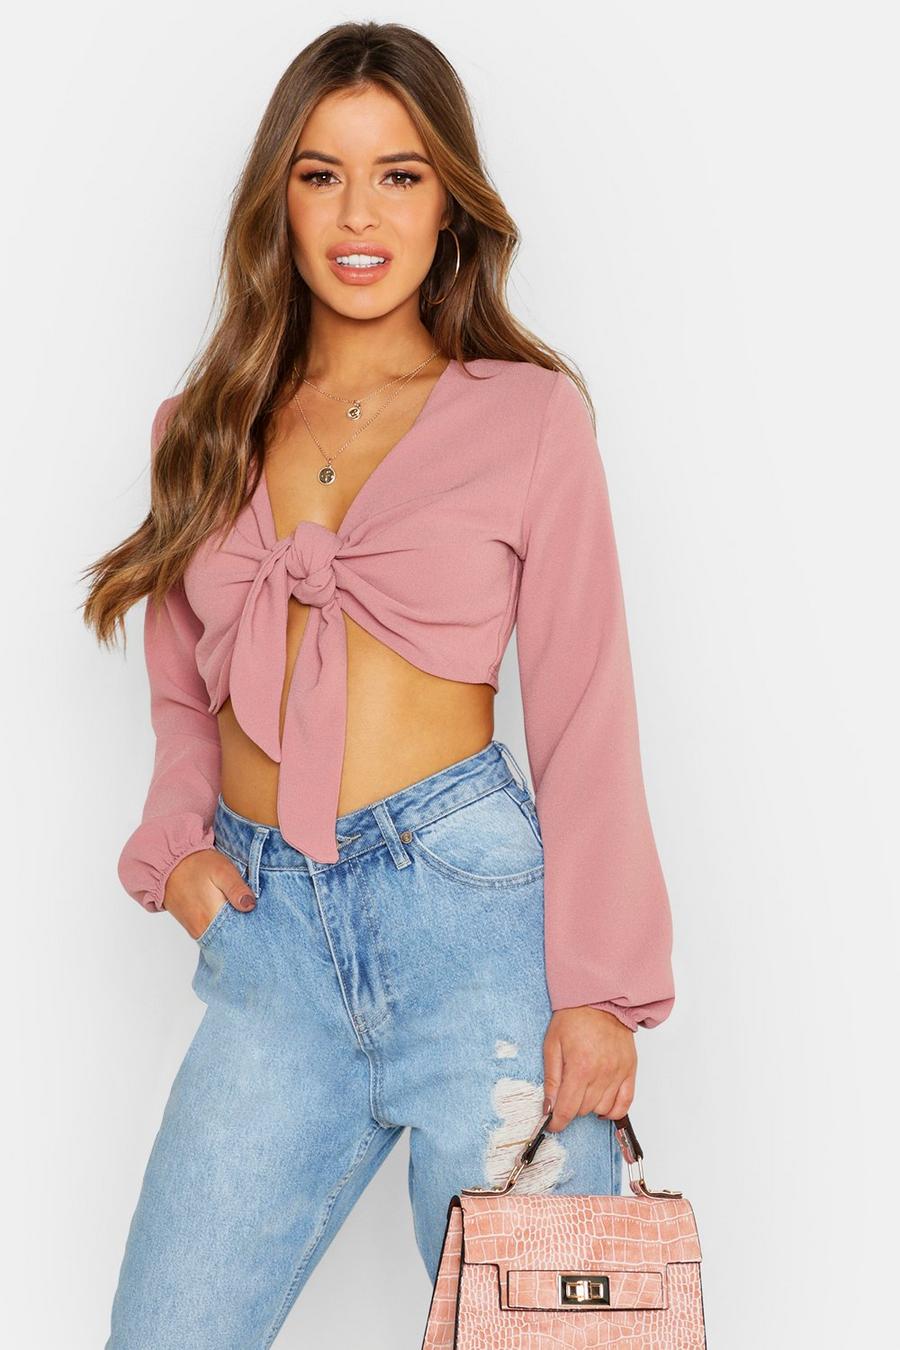 Women Summer Tops Knotted Tie Front Crop Tops Cropped T Shirt Casual Blouse FE 